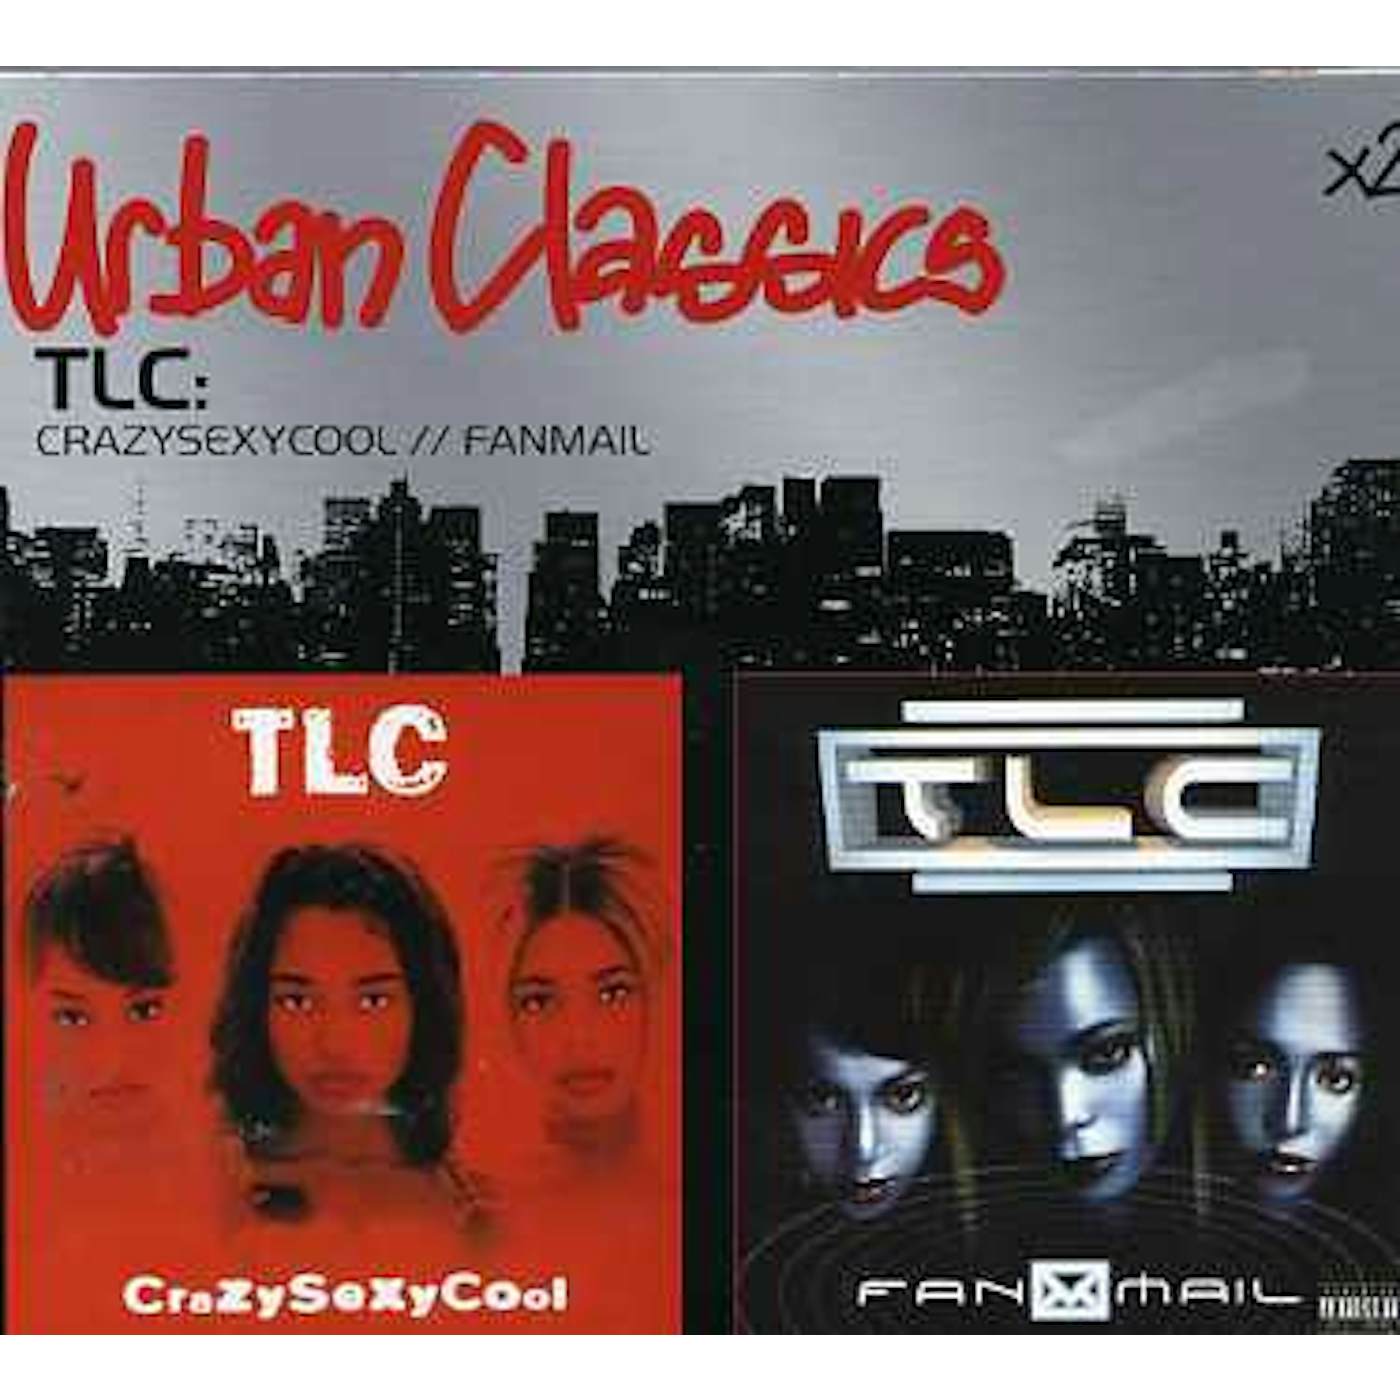 TLC CRAZYSEXYCOOL / FANMAIL CD